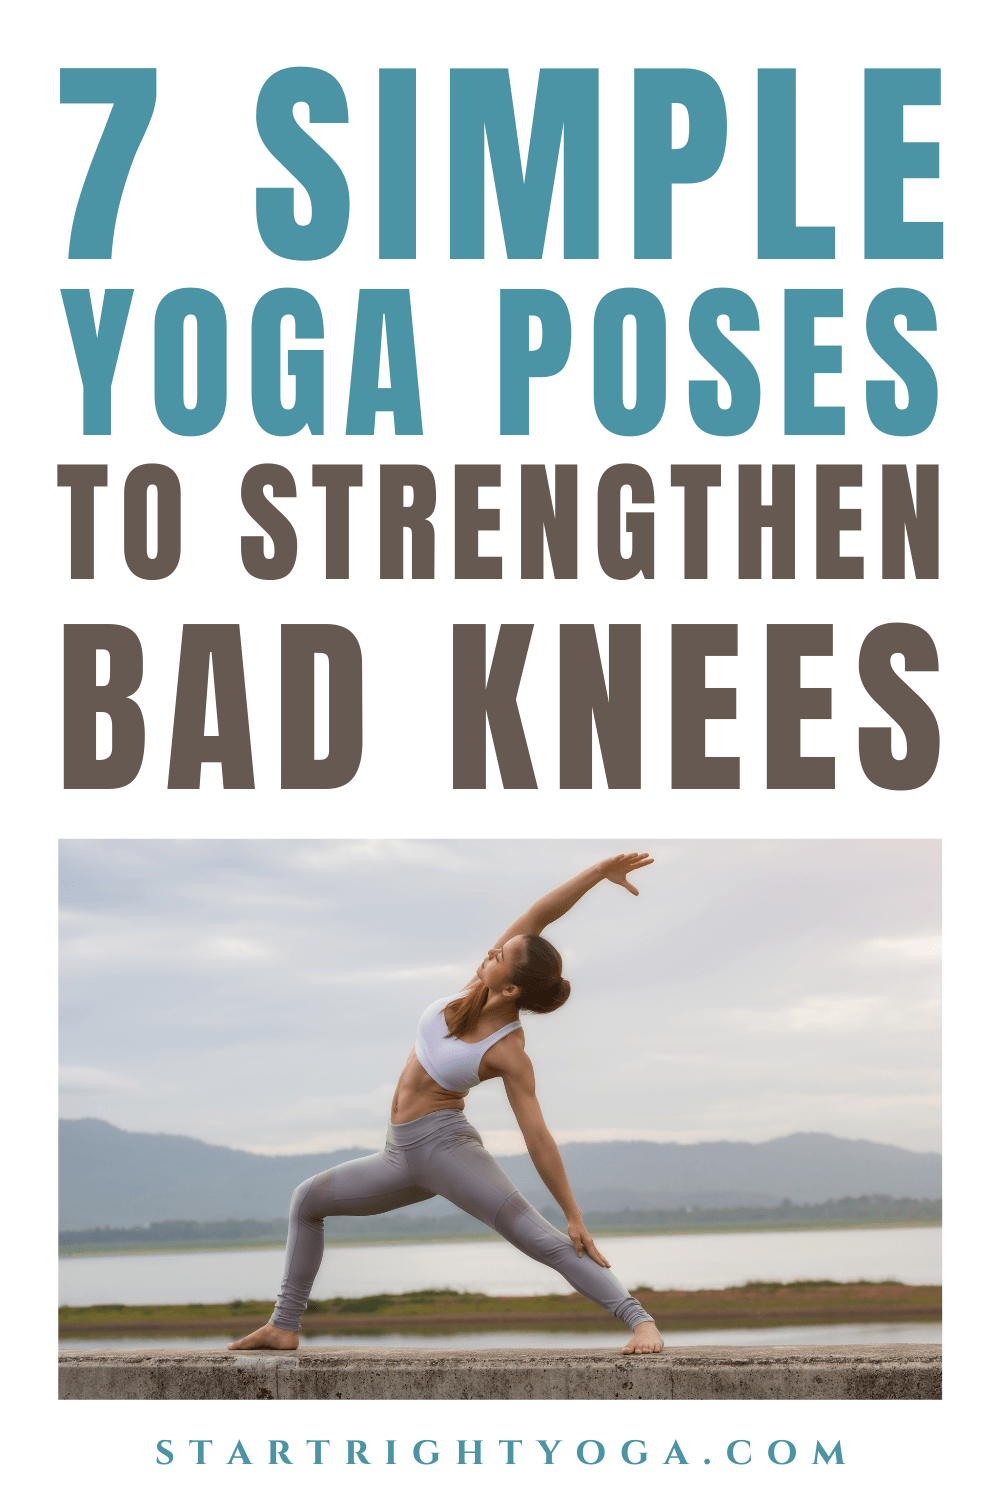 4 Yoga Mistakes that Can Cause Knee Pain - Gaiam